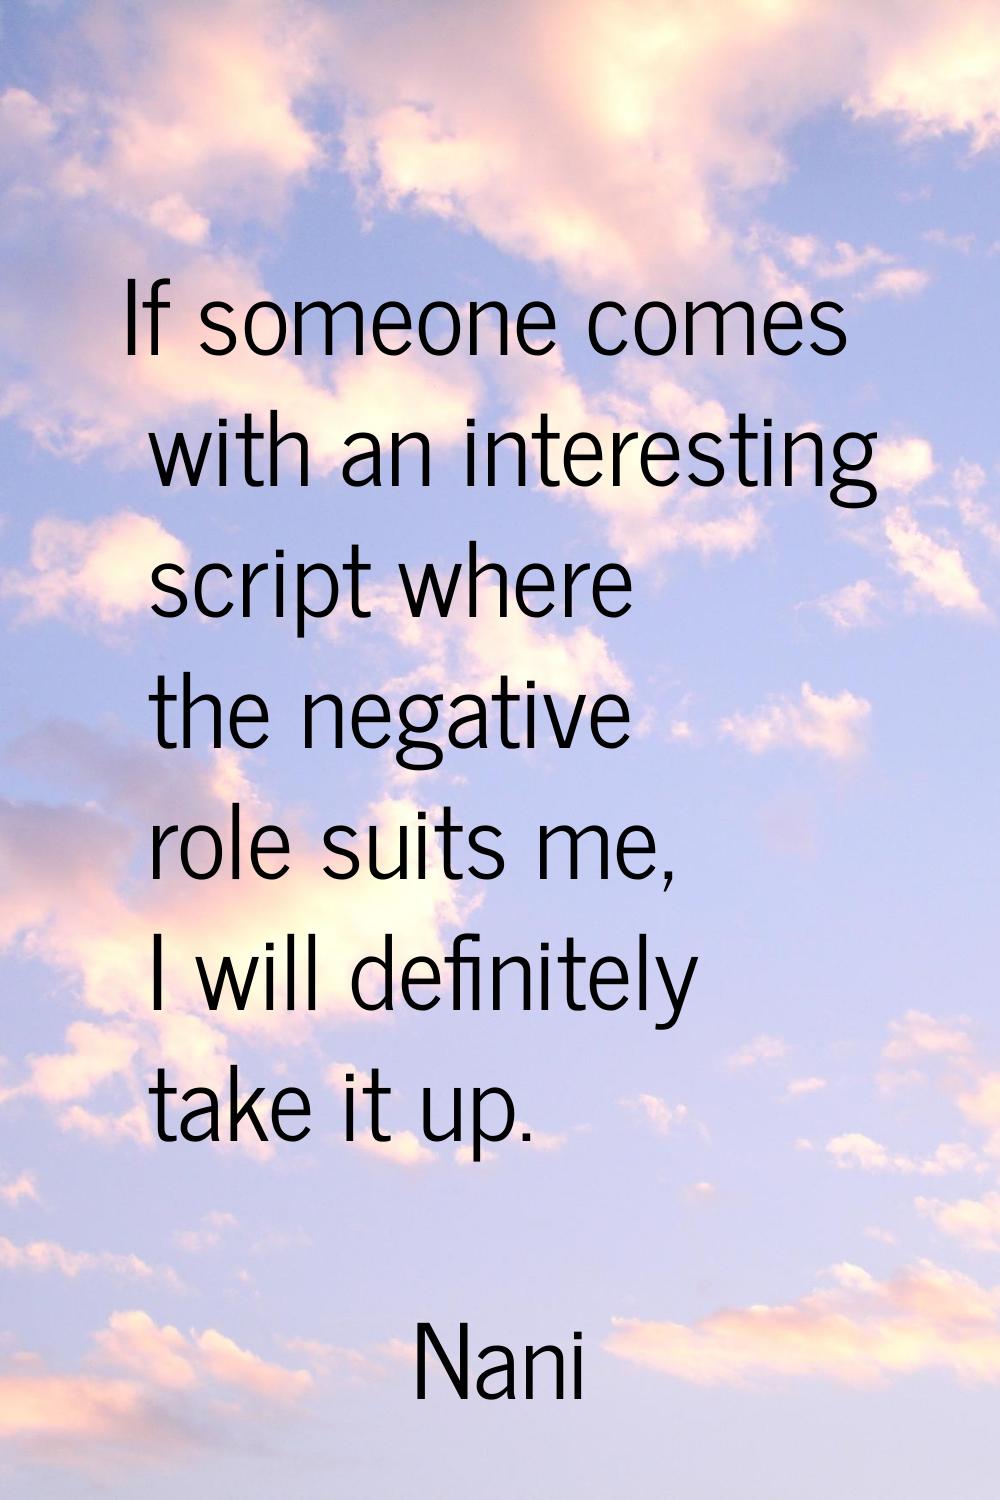 If someone comes with an interesting script where the negative role suits me, I will definitely tak